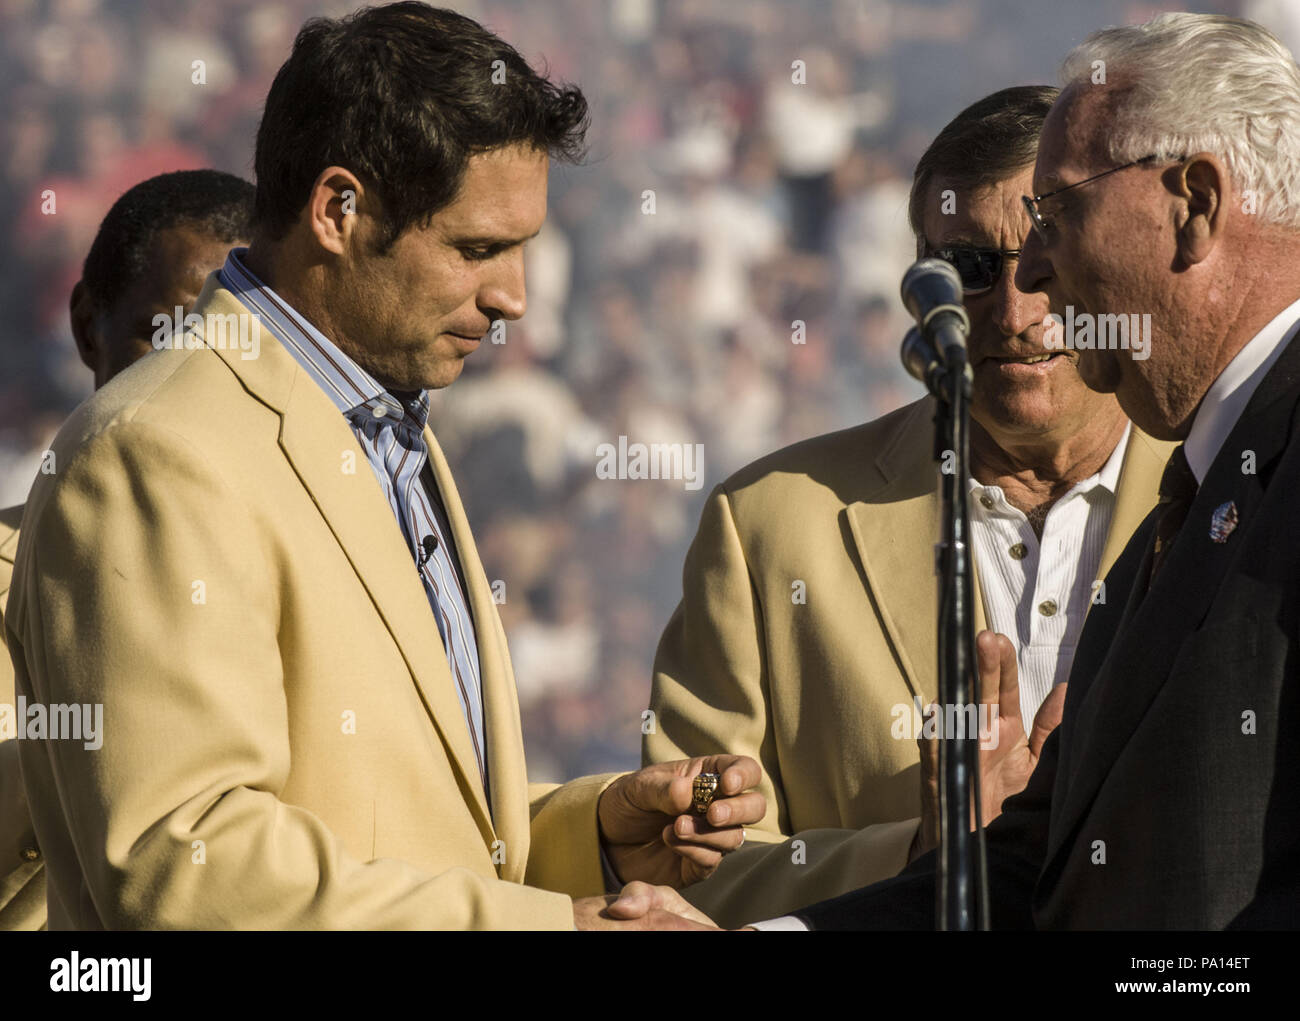 San Francisco, California, USA. 20th Nov, 2005. Pro Football Hall of Fame interim executive director Ron Dougherty presents Steve Young with his ring on Sunday, November 20, 2005, in San Francisco, California. The Seahawks defeated the 49ers 27-25. Credit: Al Golub/ZUMA Wire/Alamy Live News Stock Photo